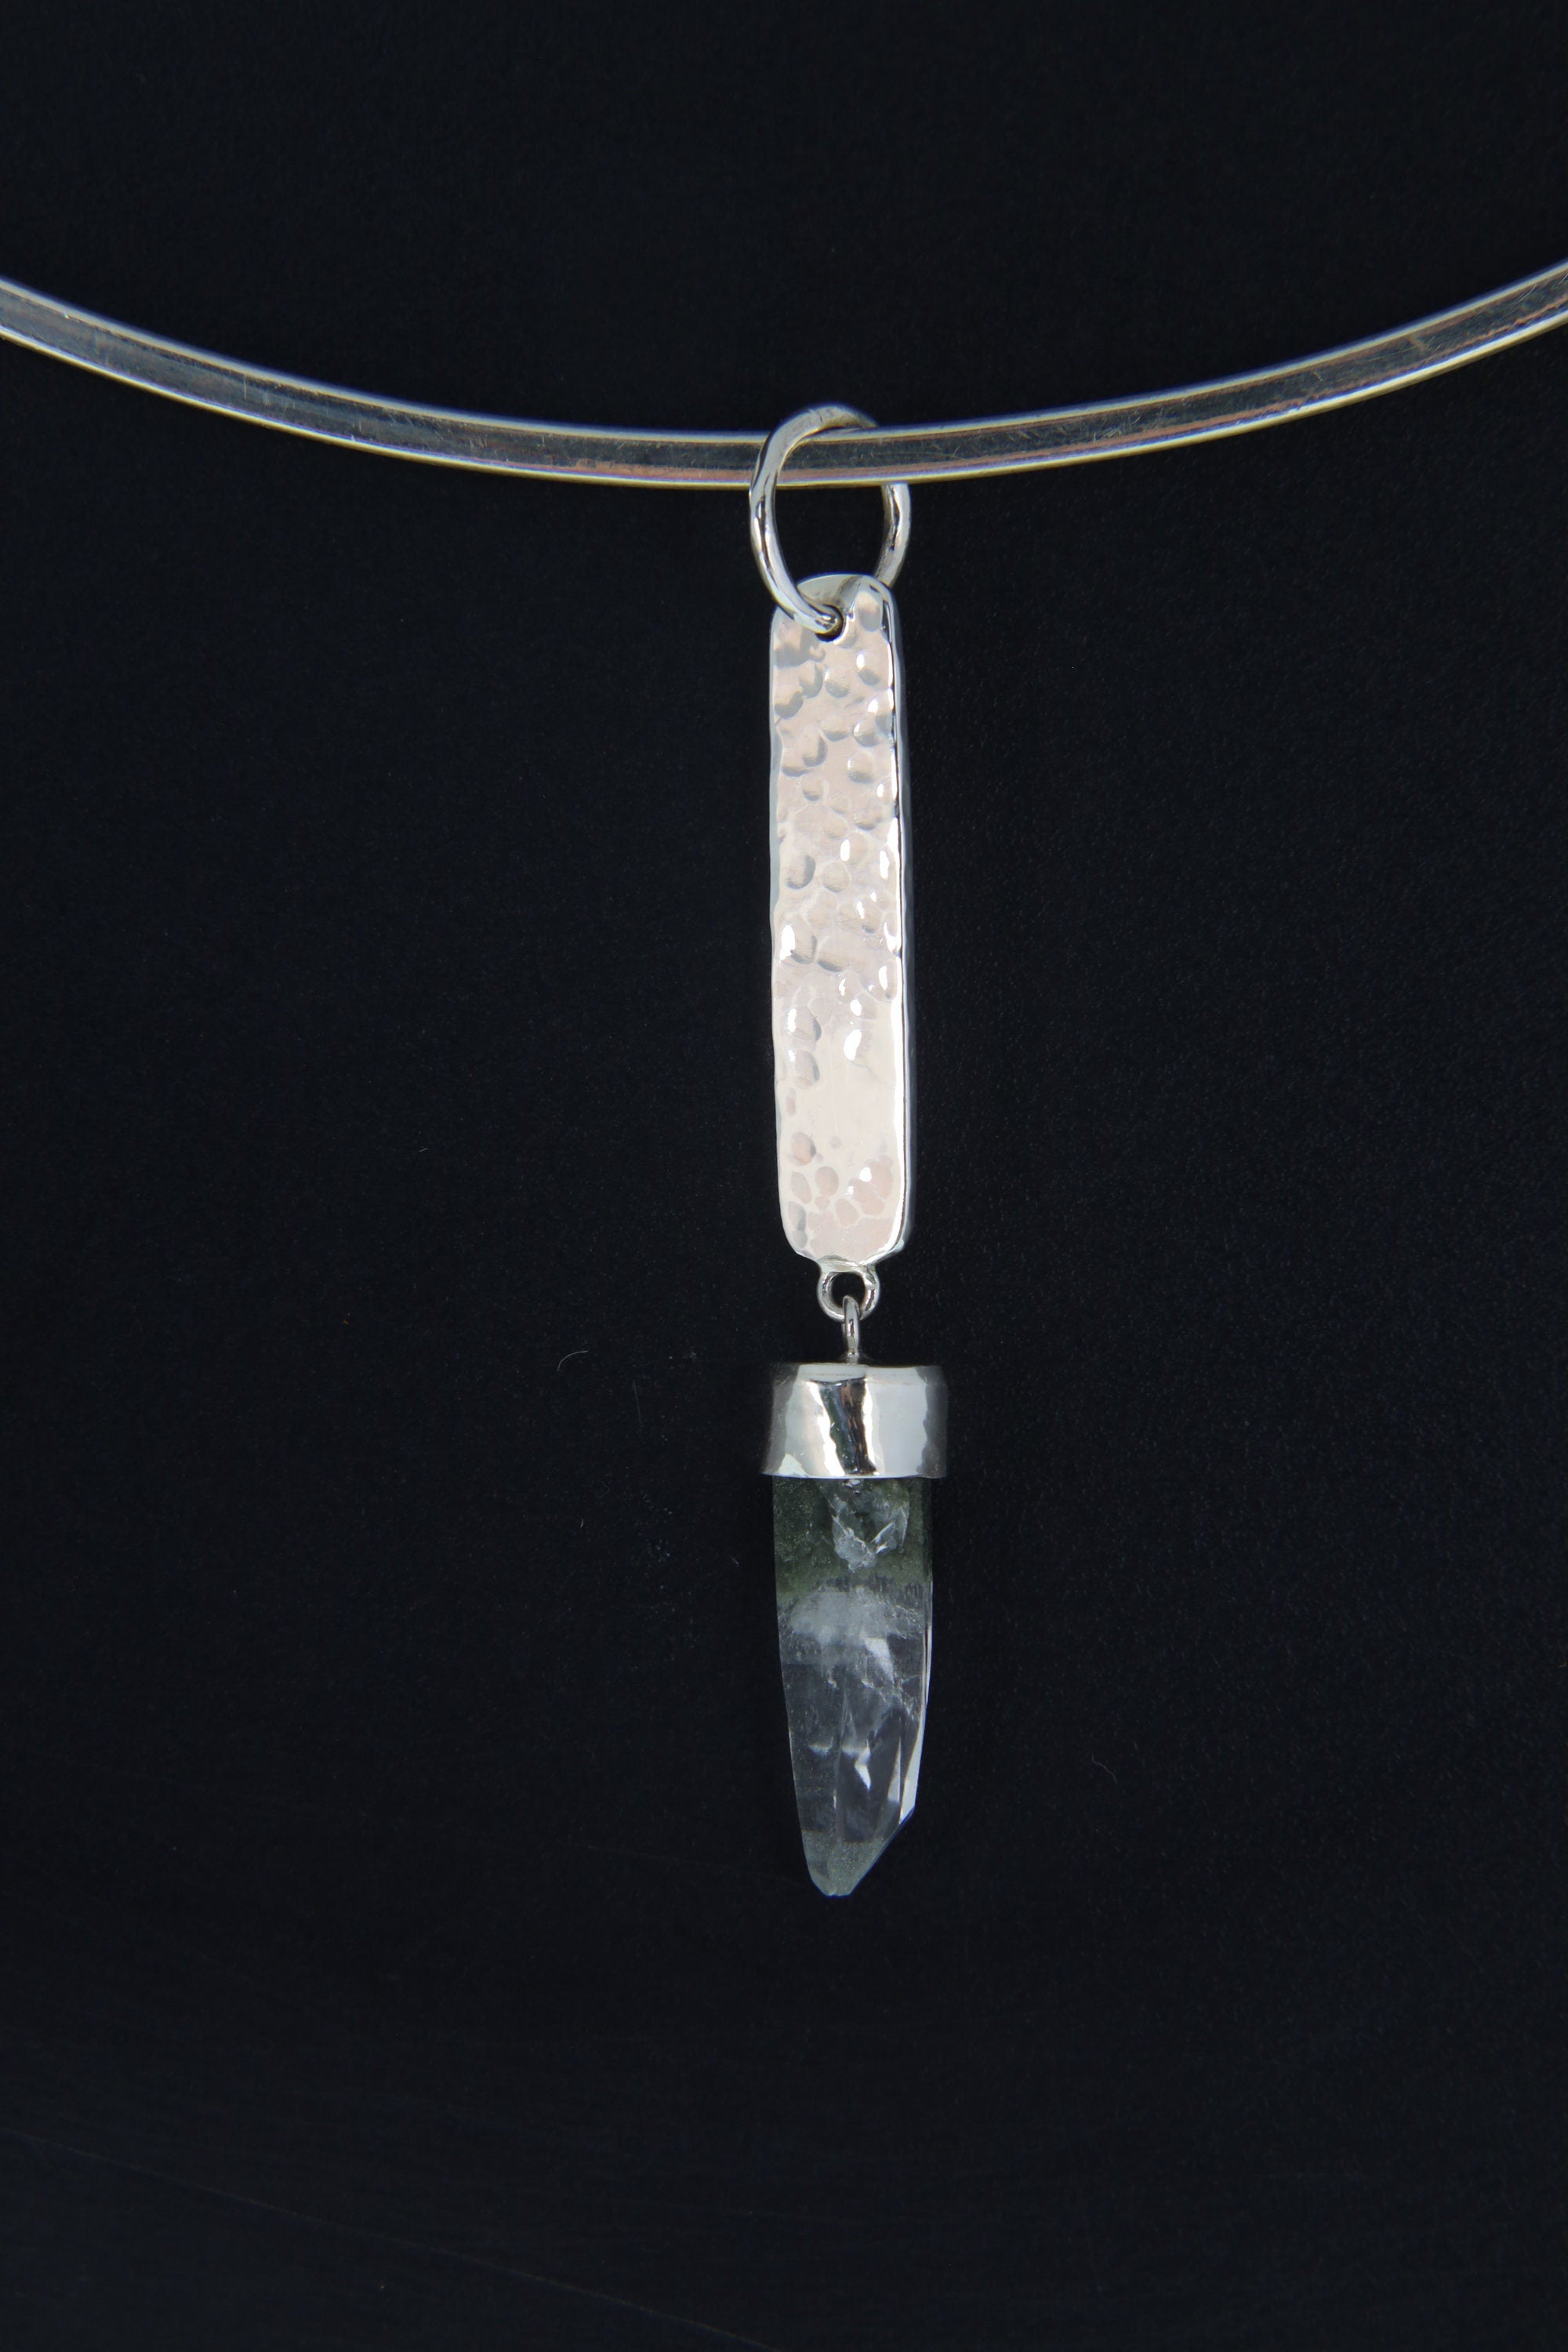 Himalayan Harmony Chloride Inclusion Laser Quartz Point Pendant - Sterling Silver - Hammer Texture & Shiny Finish